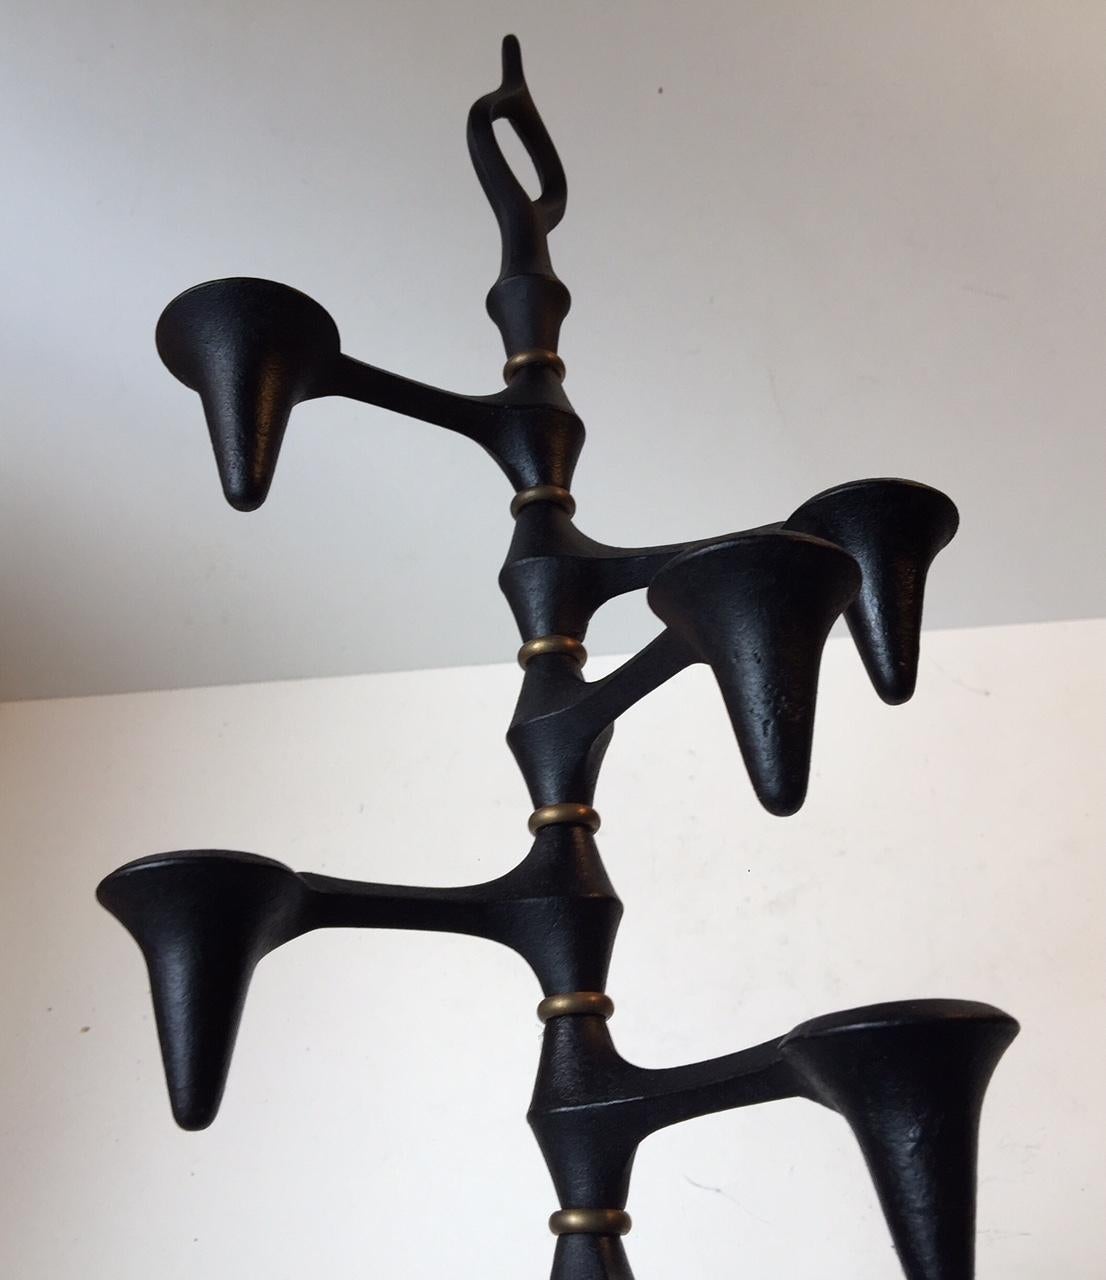 Mid-Century Modern Danish Candleholder with Rotating Joints by Jens Harald Quistgaard, 1960s